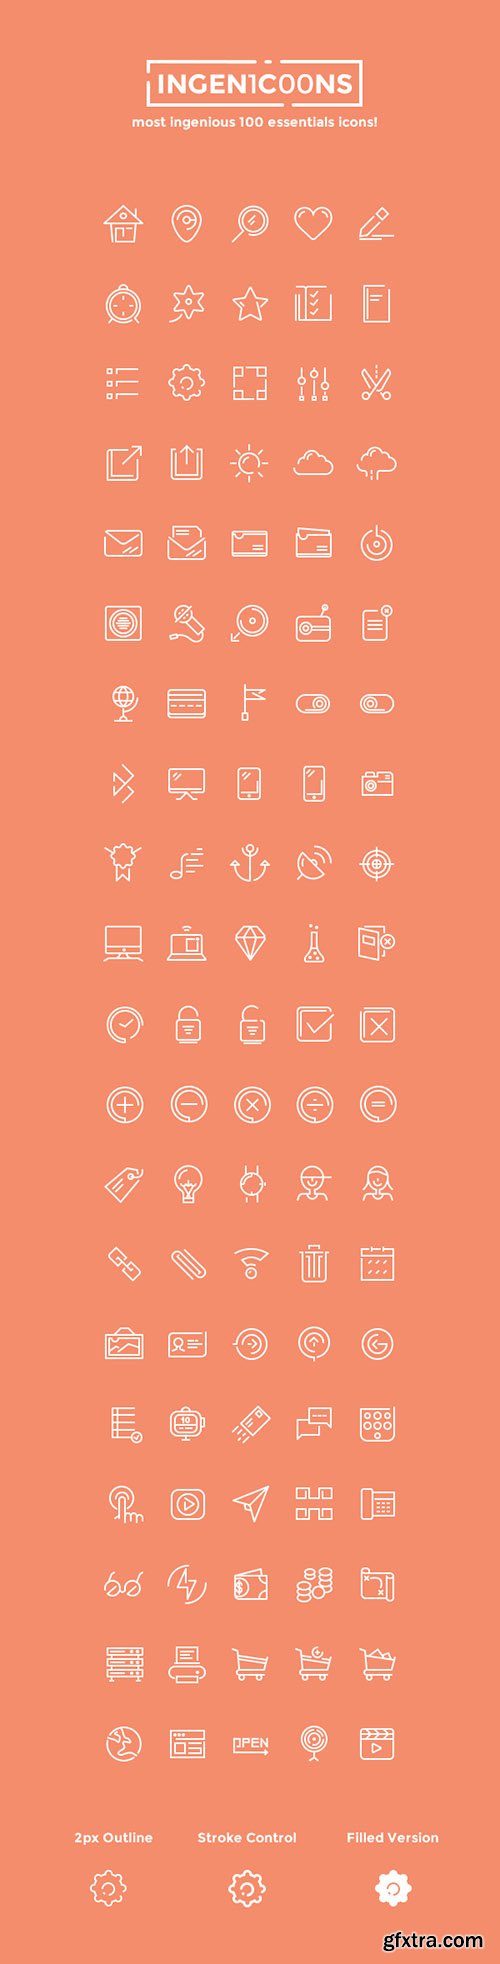 Ai, PSD, PNG Vector Icons - Ingenicons